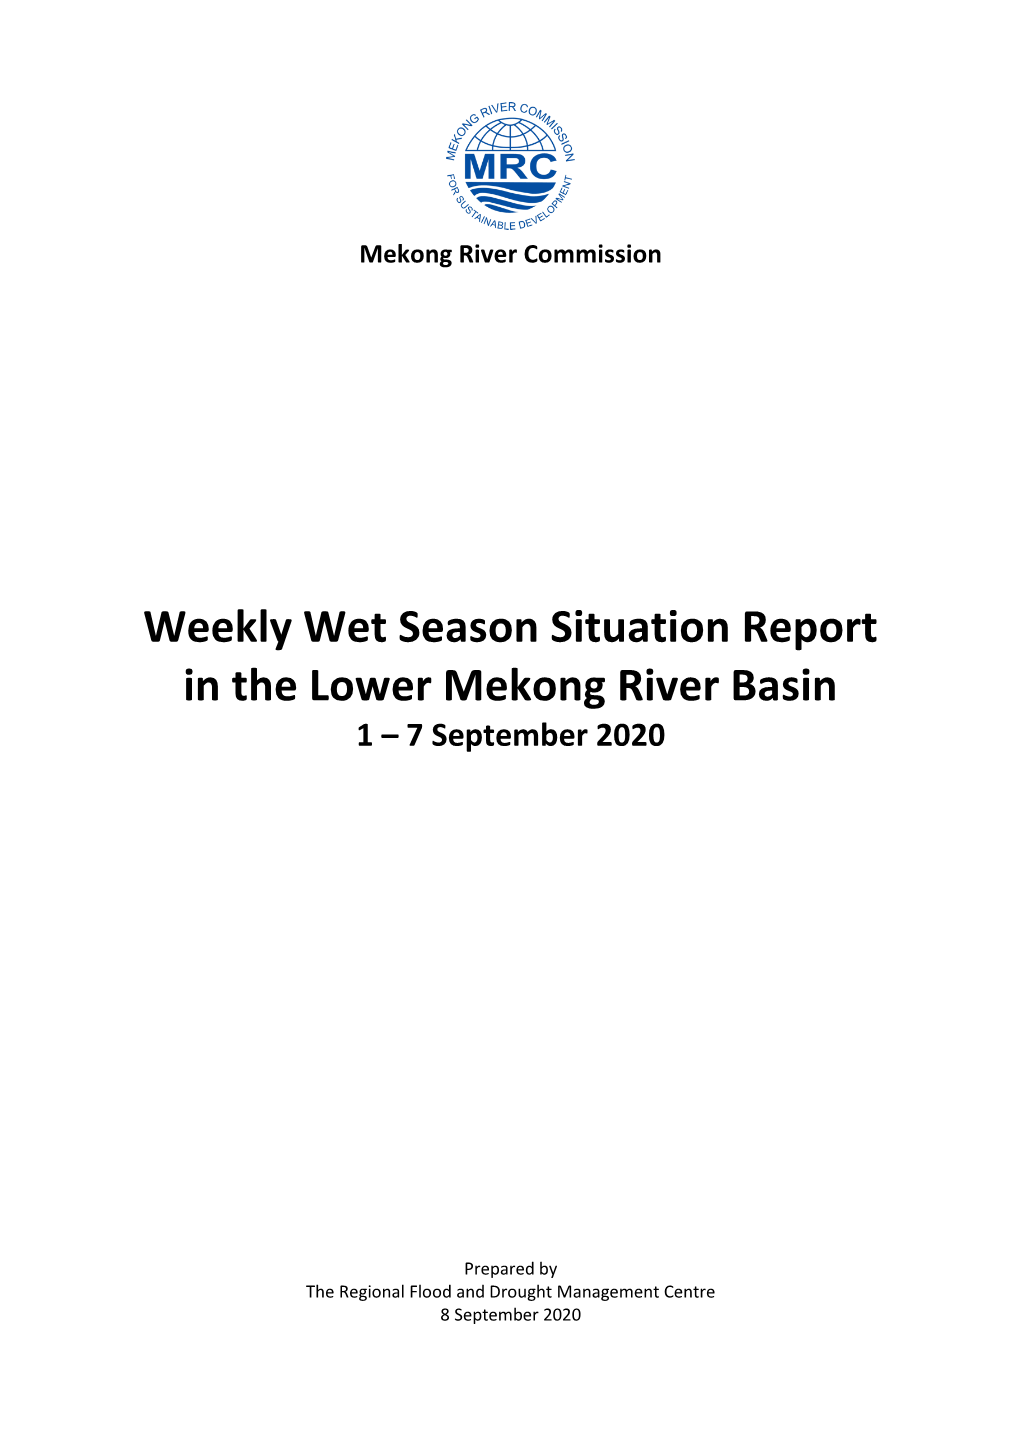 Weekly Wet Season Situation Report in the Lower Mekong River Basin 1 – 7 September 2020